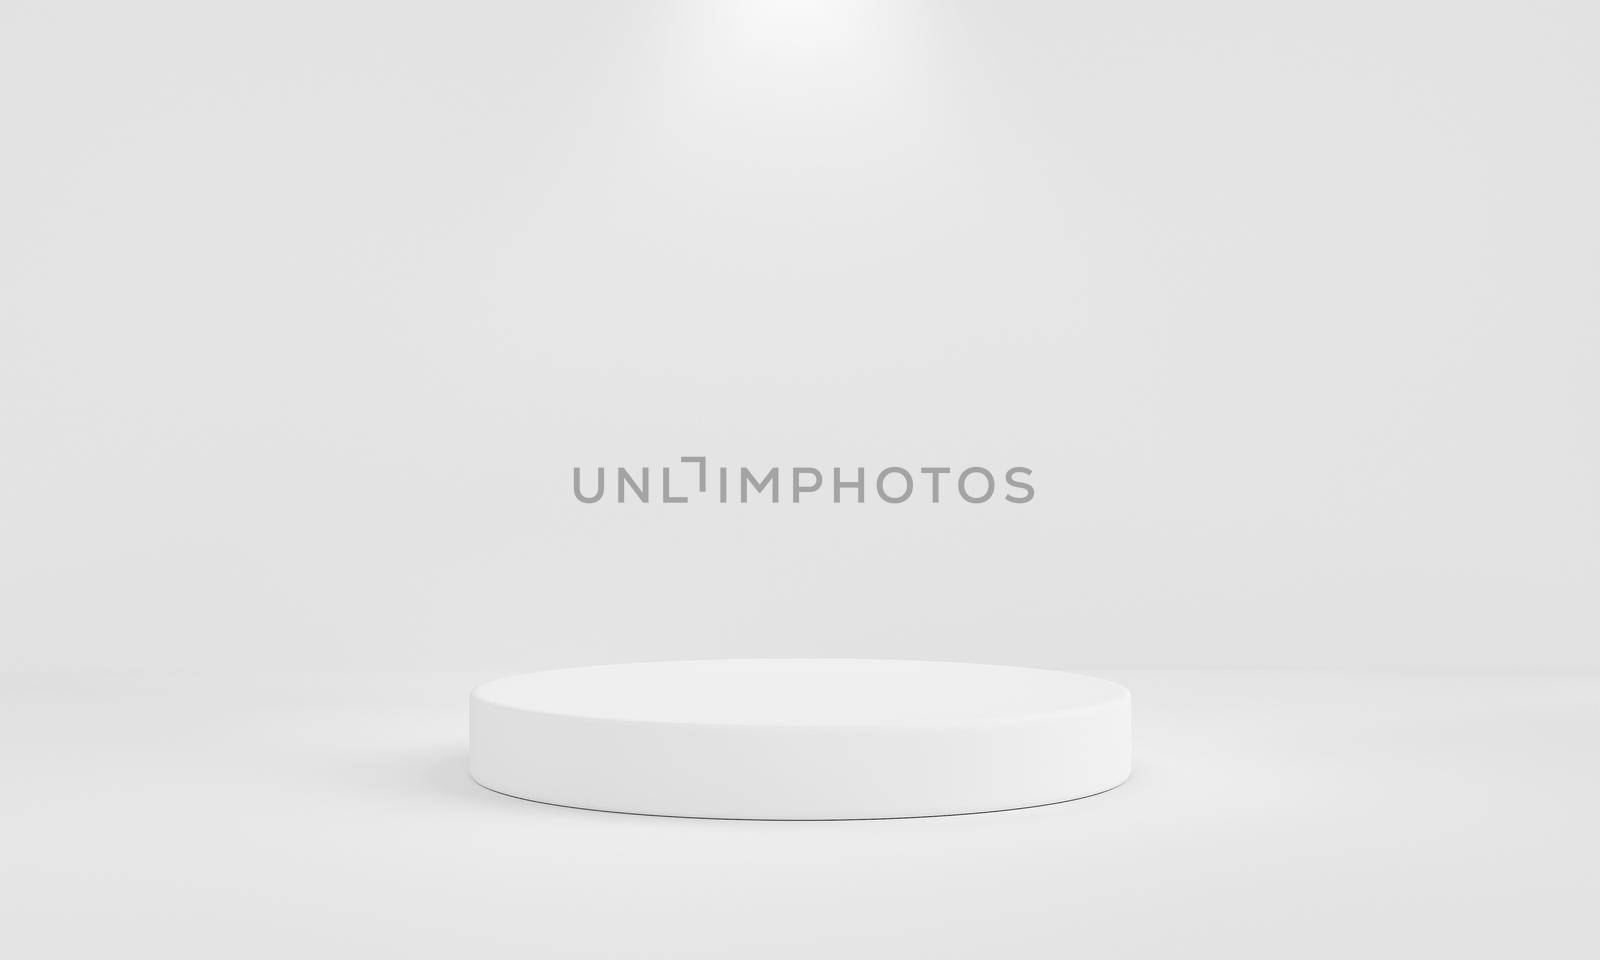 Minimal white podium with background wall and spotlight. Abstract and object for advertising concept. 3D illustration rendering